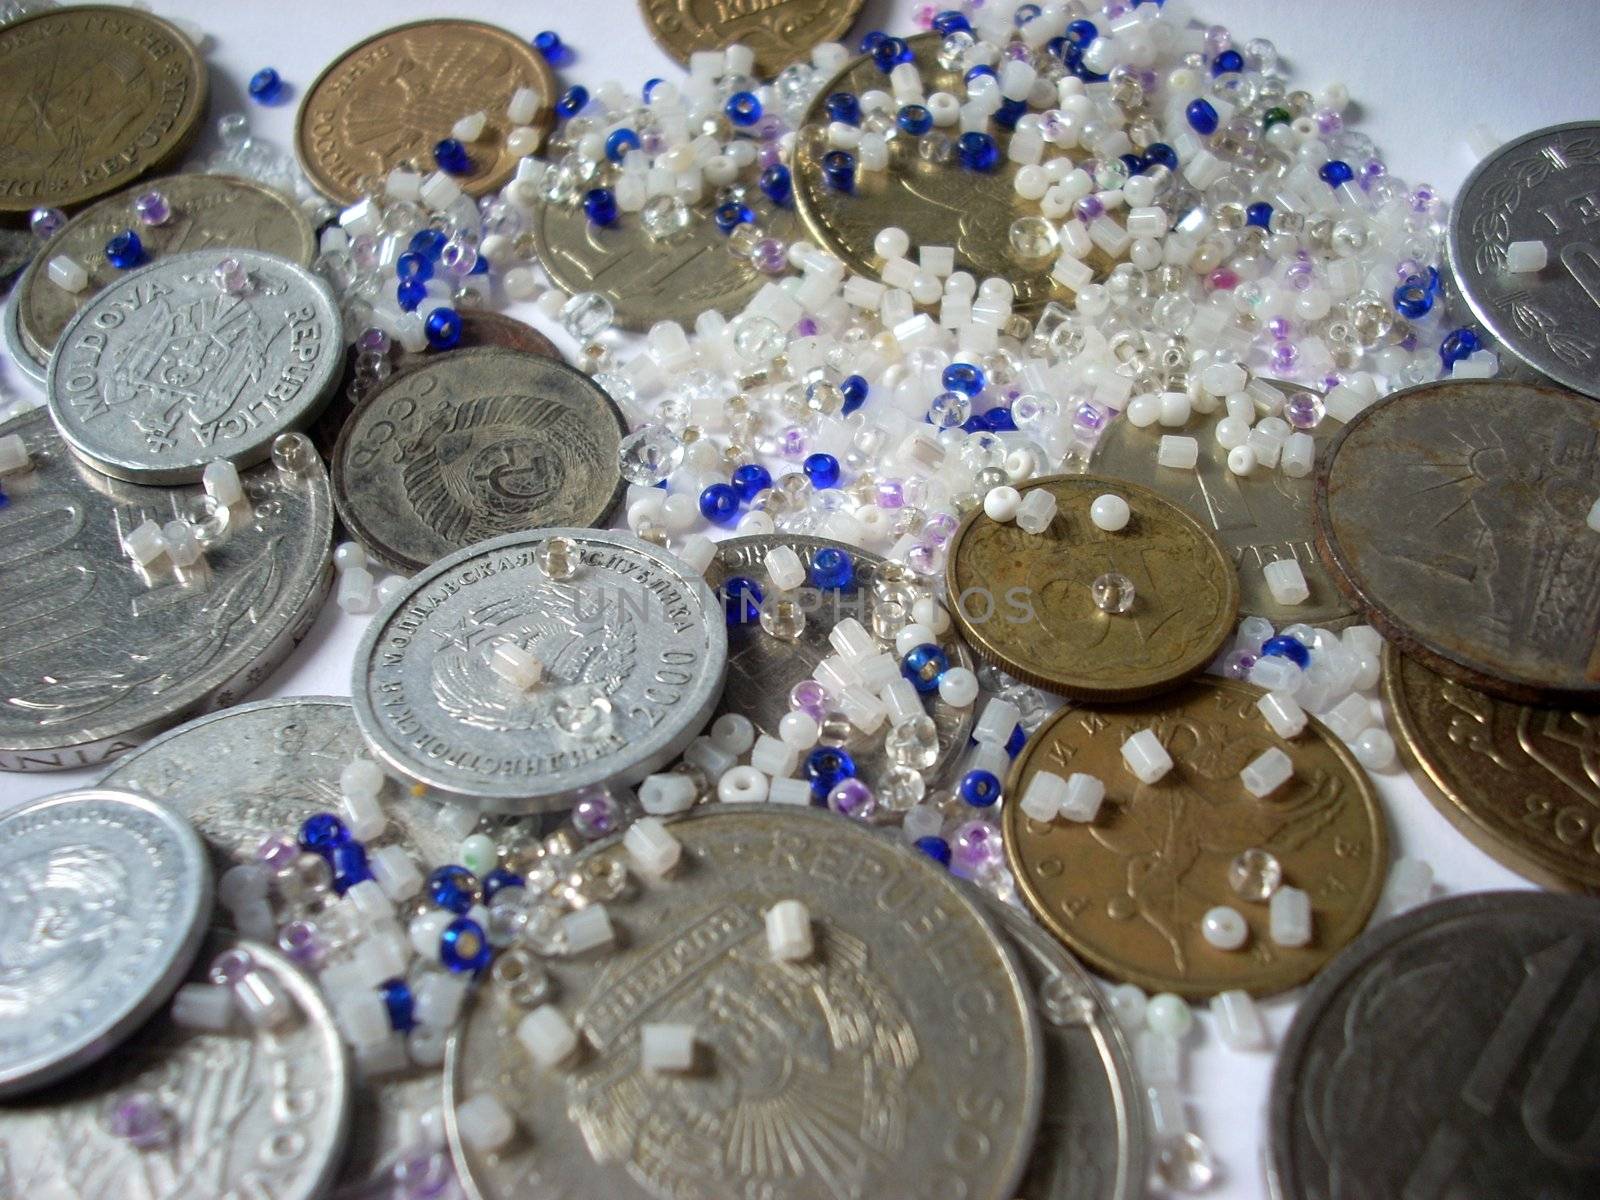 Money: some coins and glass beads